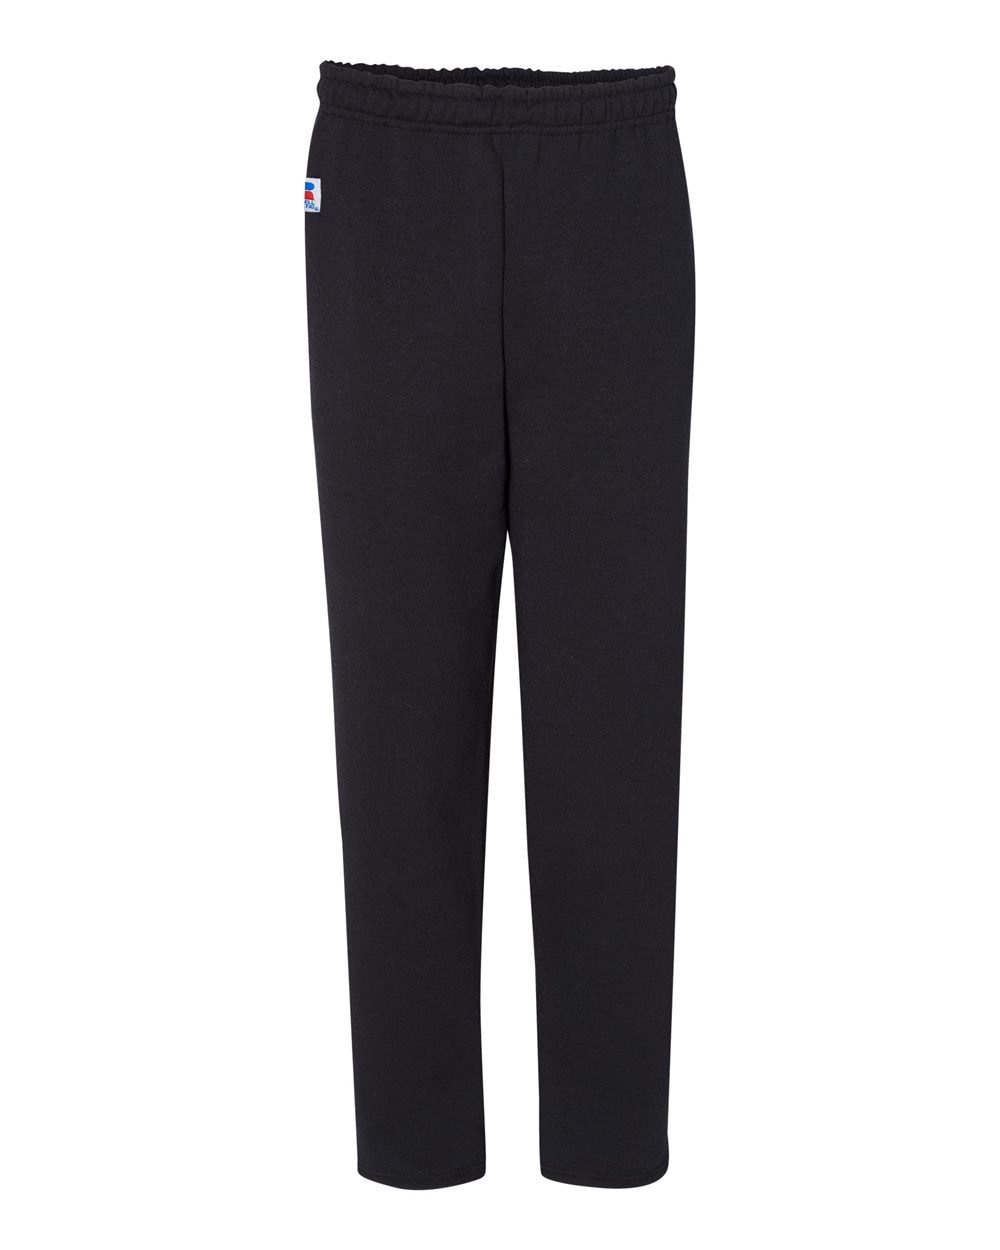 Russell Athletic Dri Power Open Bottom Pocket Sweatpants Unisex Size up to 3XL - image 1 of 3